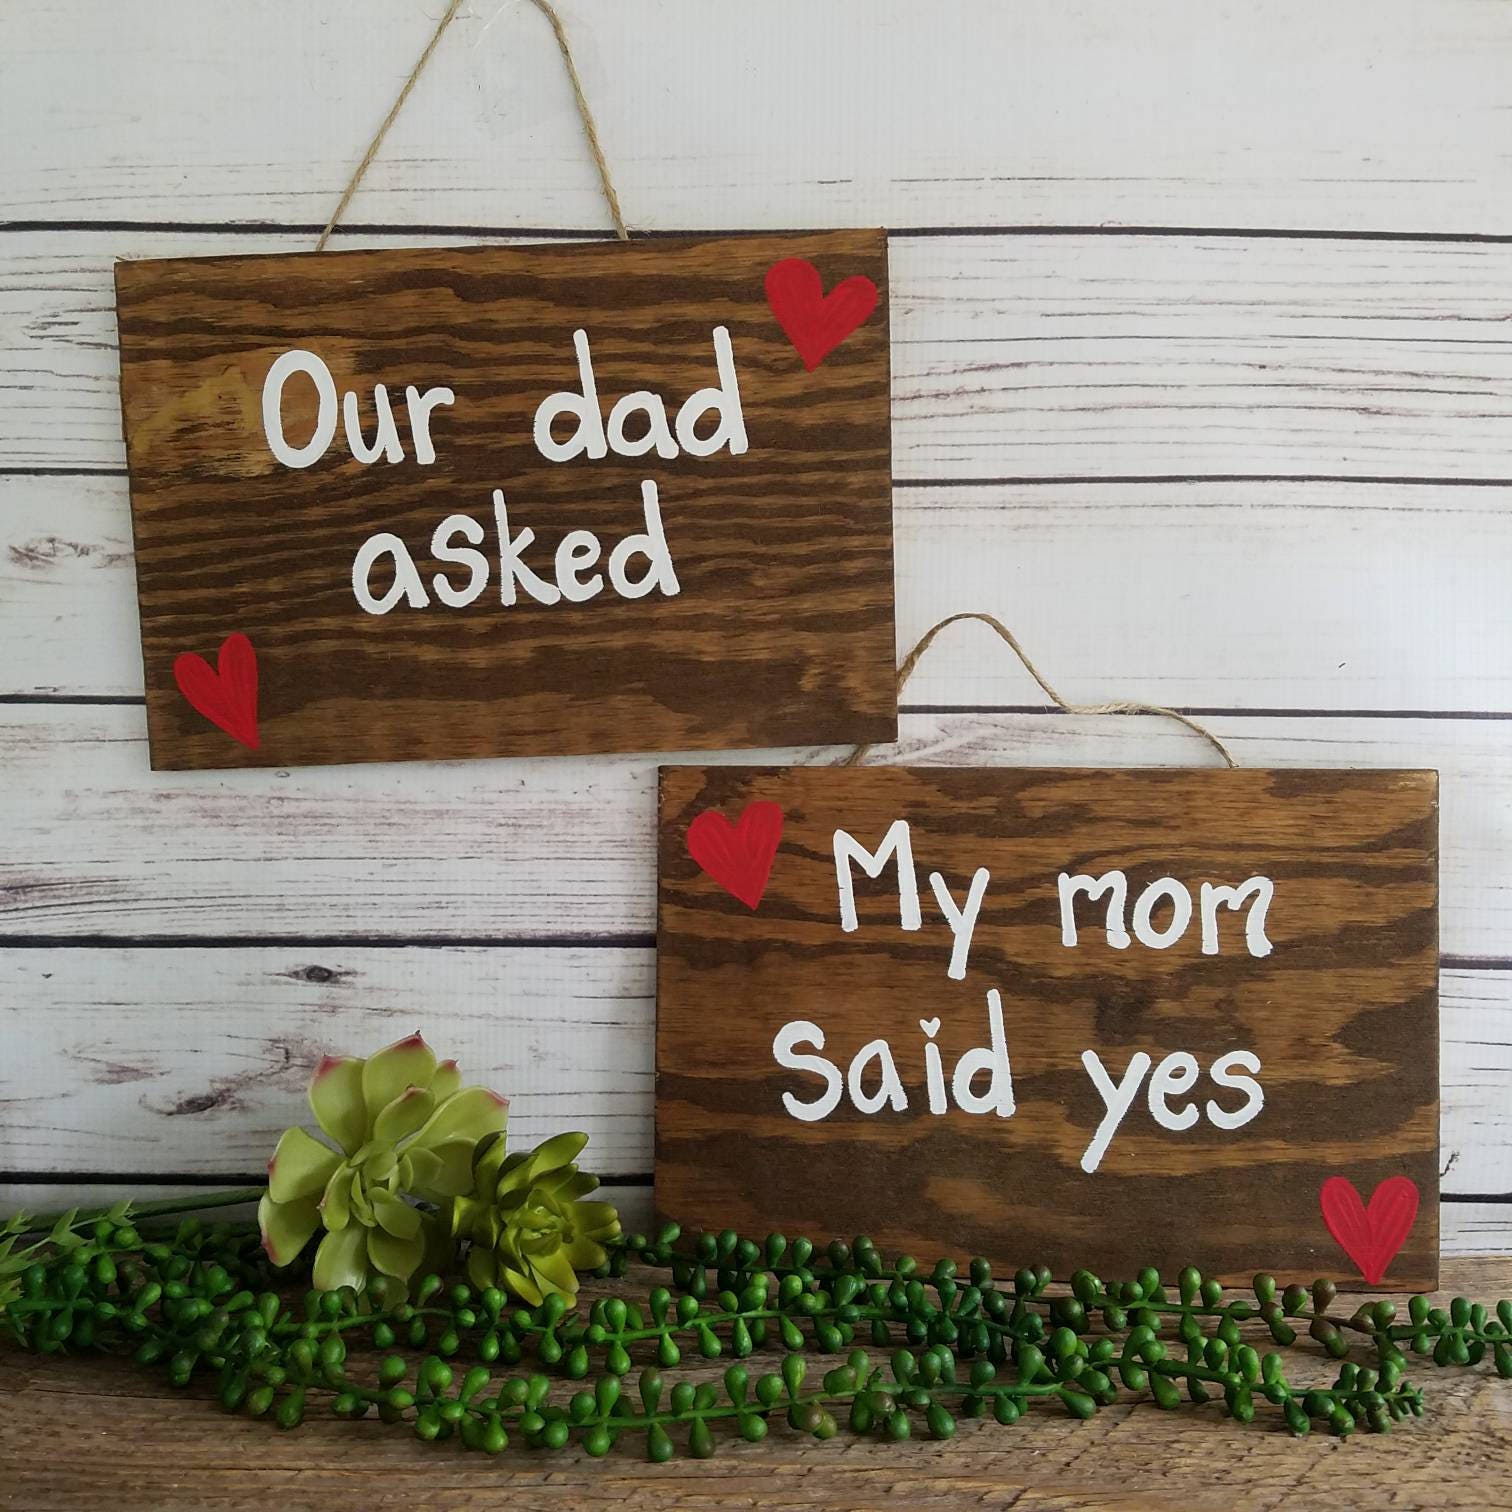 Blended Family Engagement Sign, Engagment Announcement, Wood Signs, My Mom Said Yes, Our Dad Asked, Custom